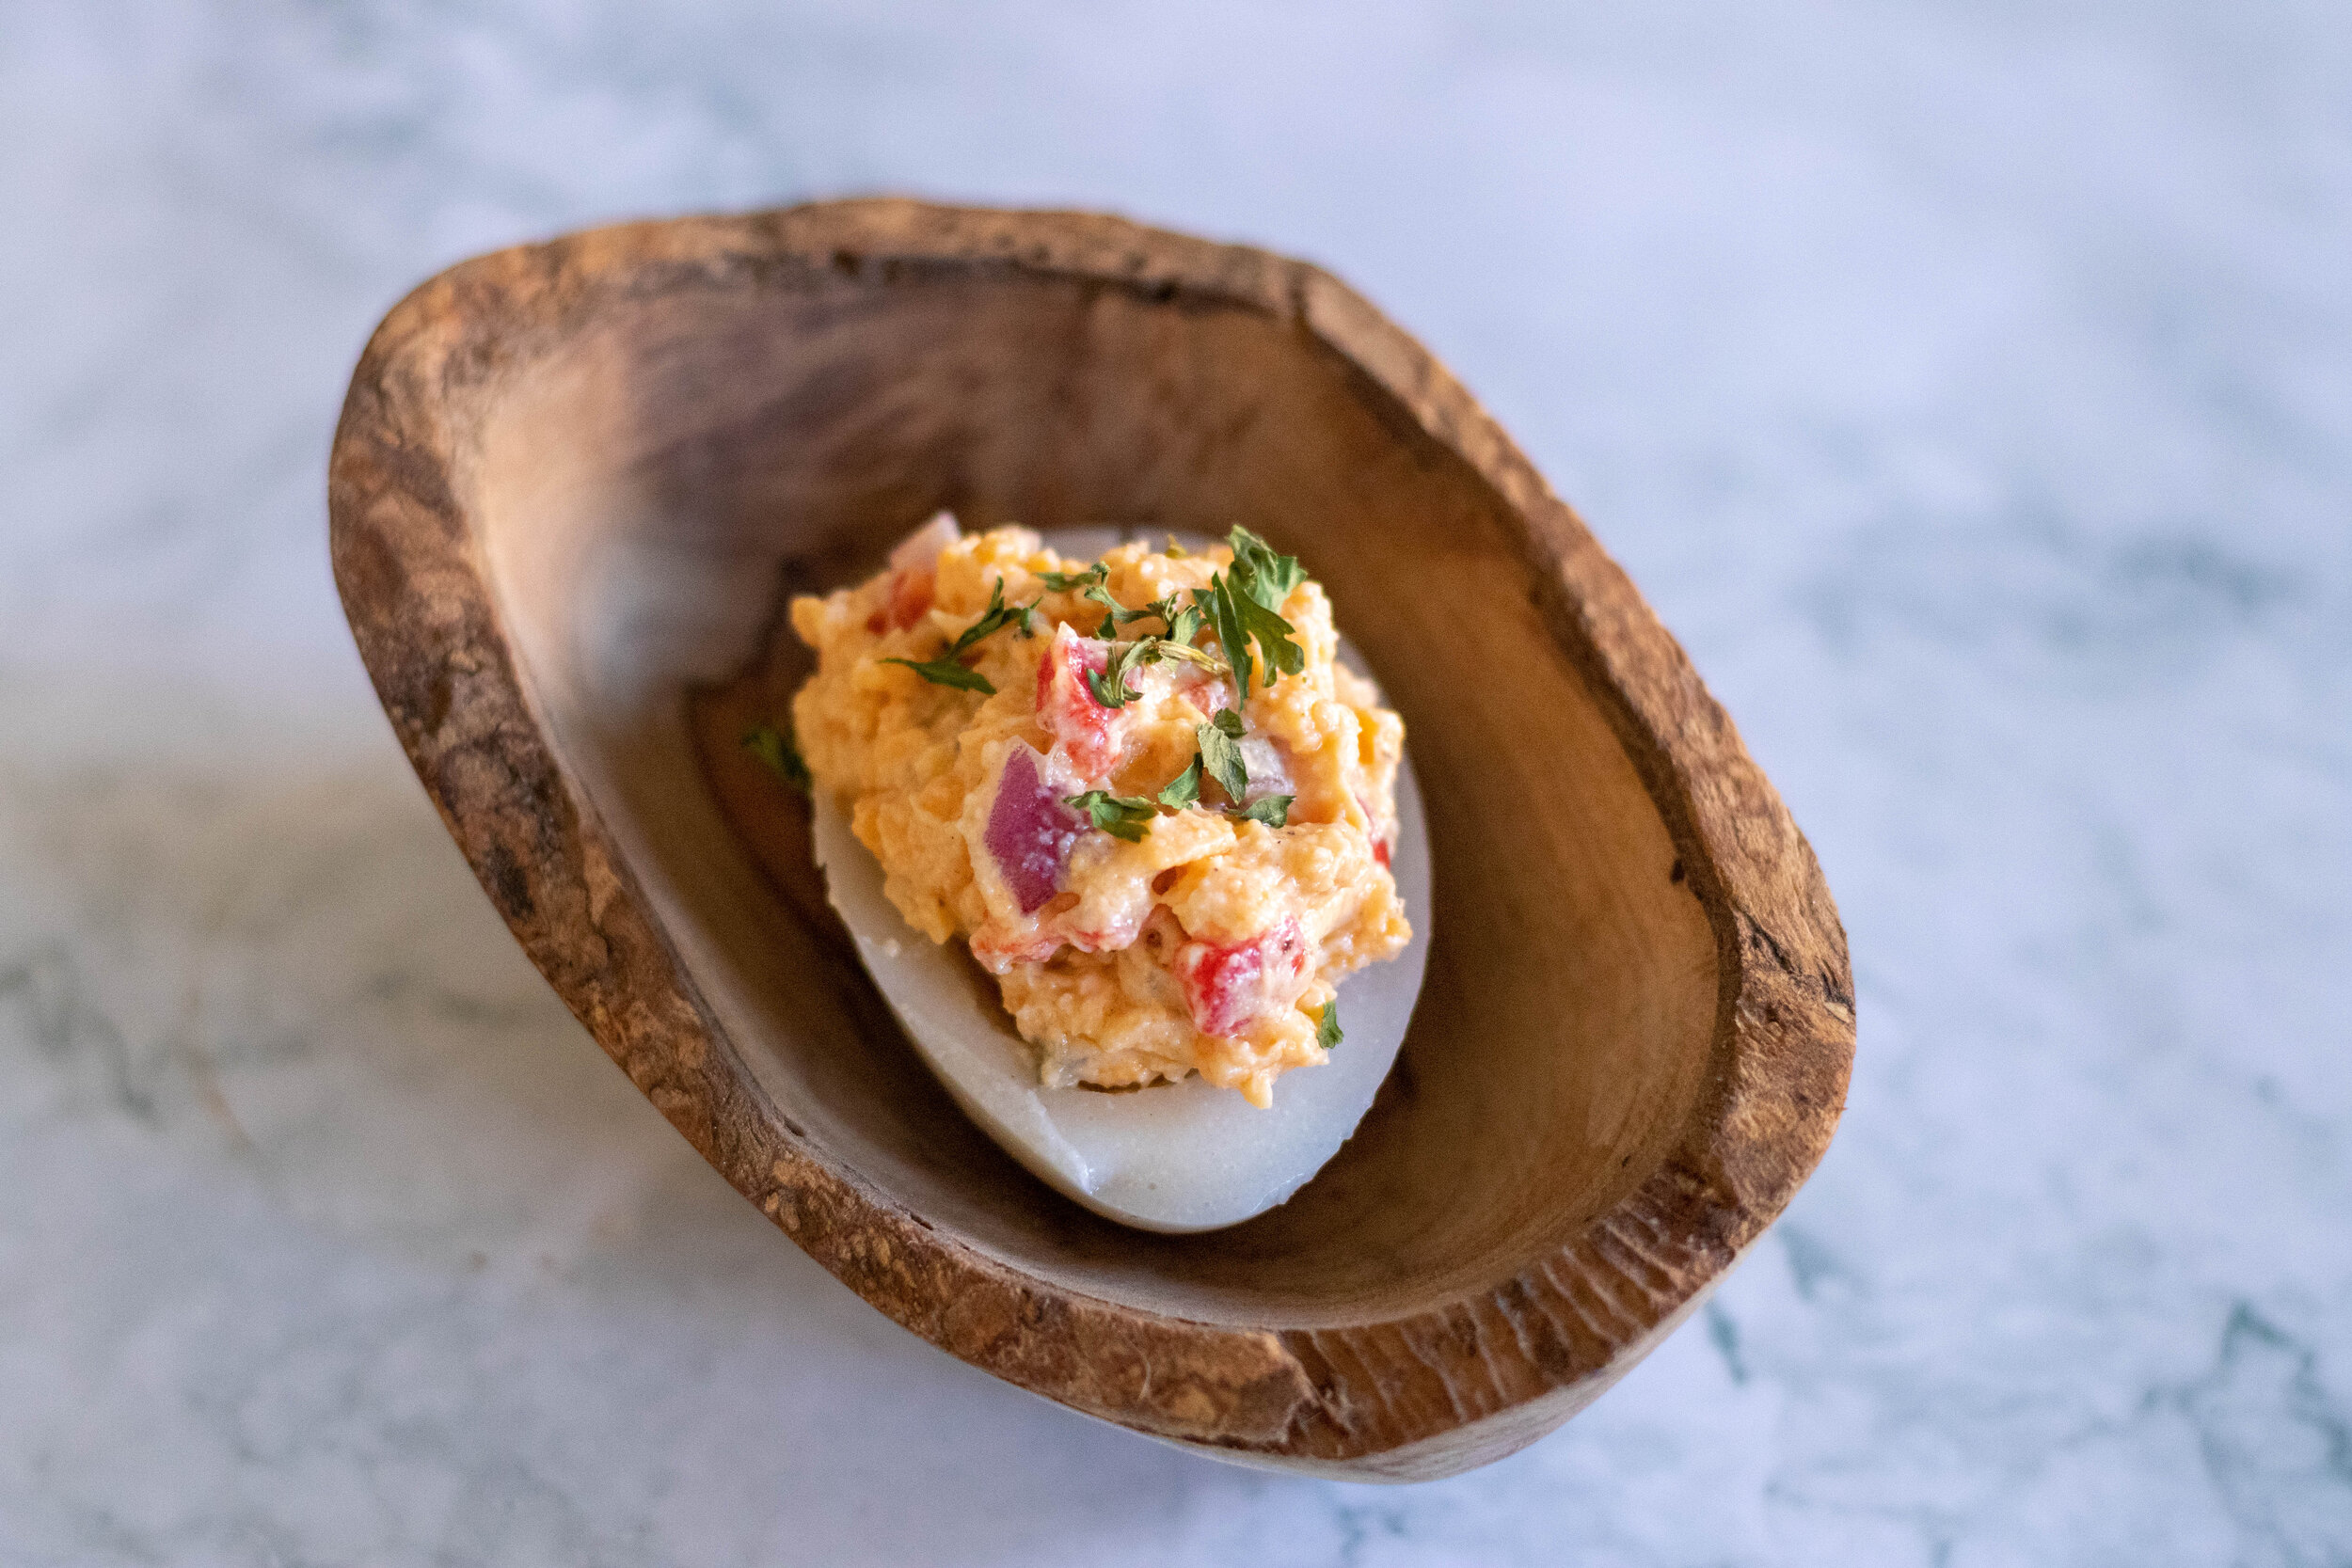 pimento cheese deviled eggs – Off the Eaten Path